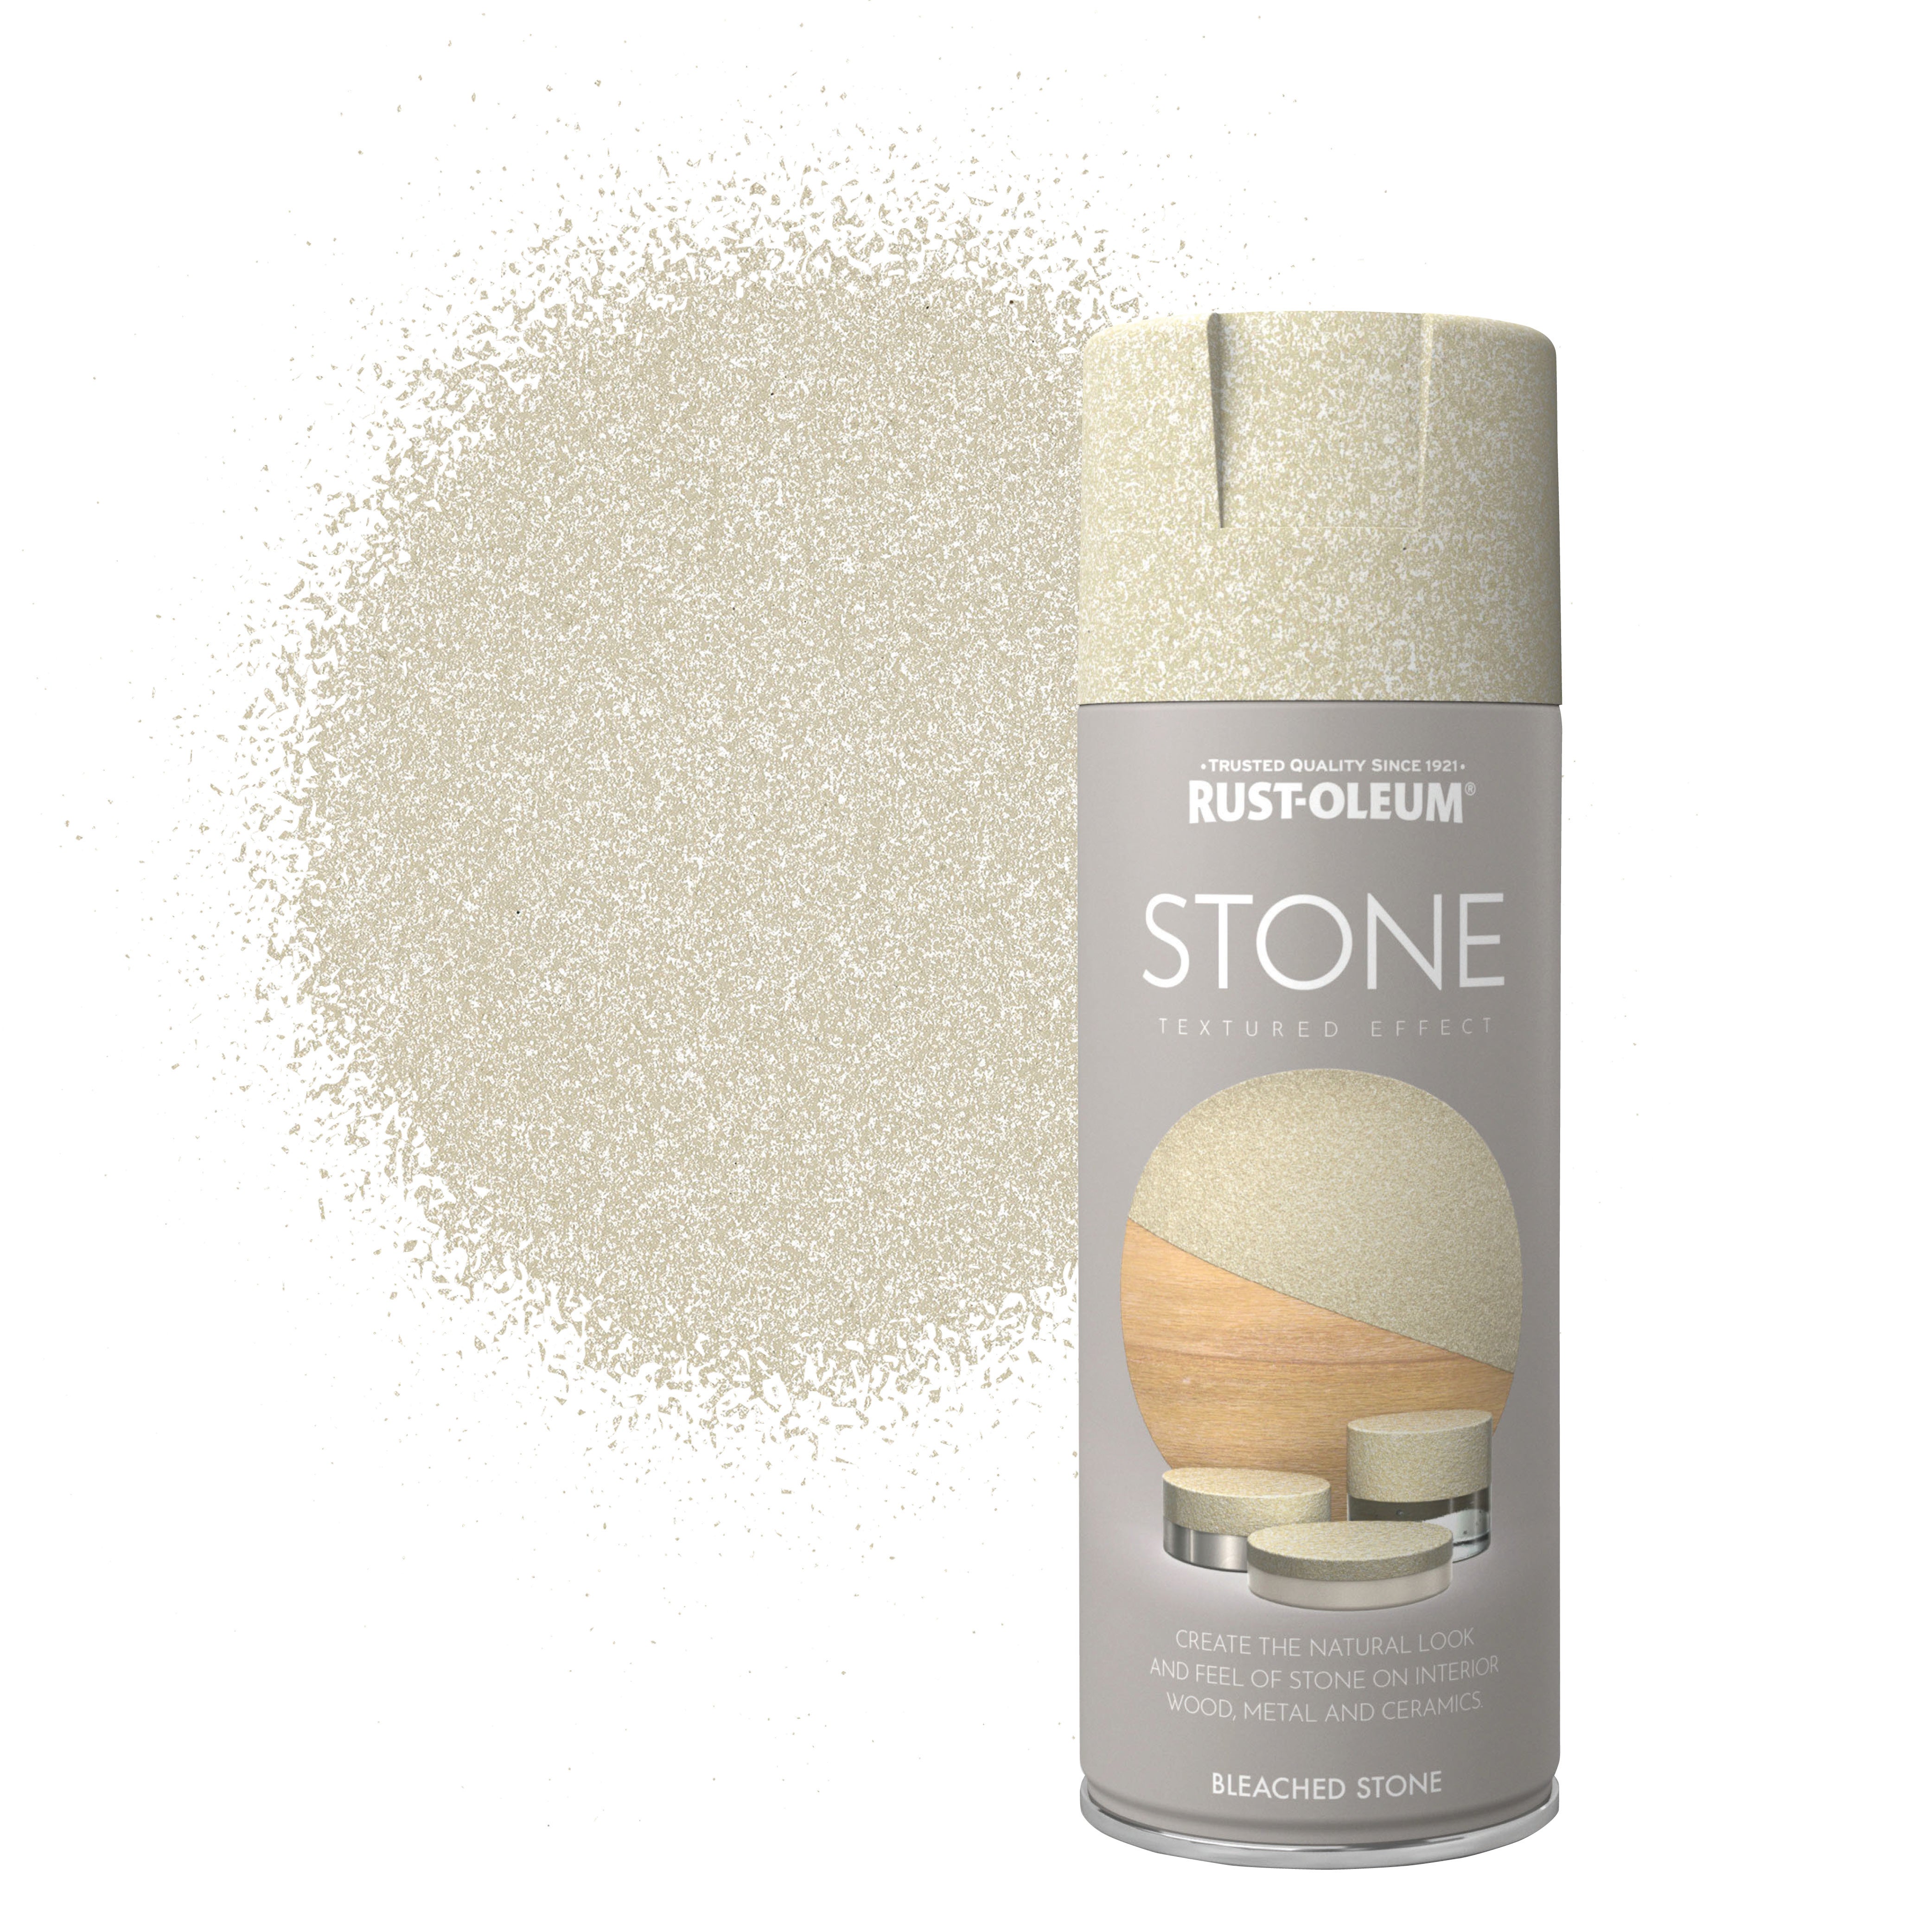 Bleached Stone spray paint  Diy crafts for home decor, Diy home